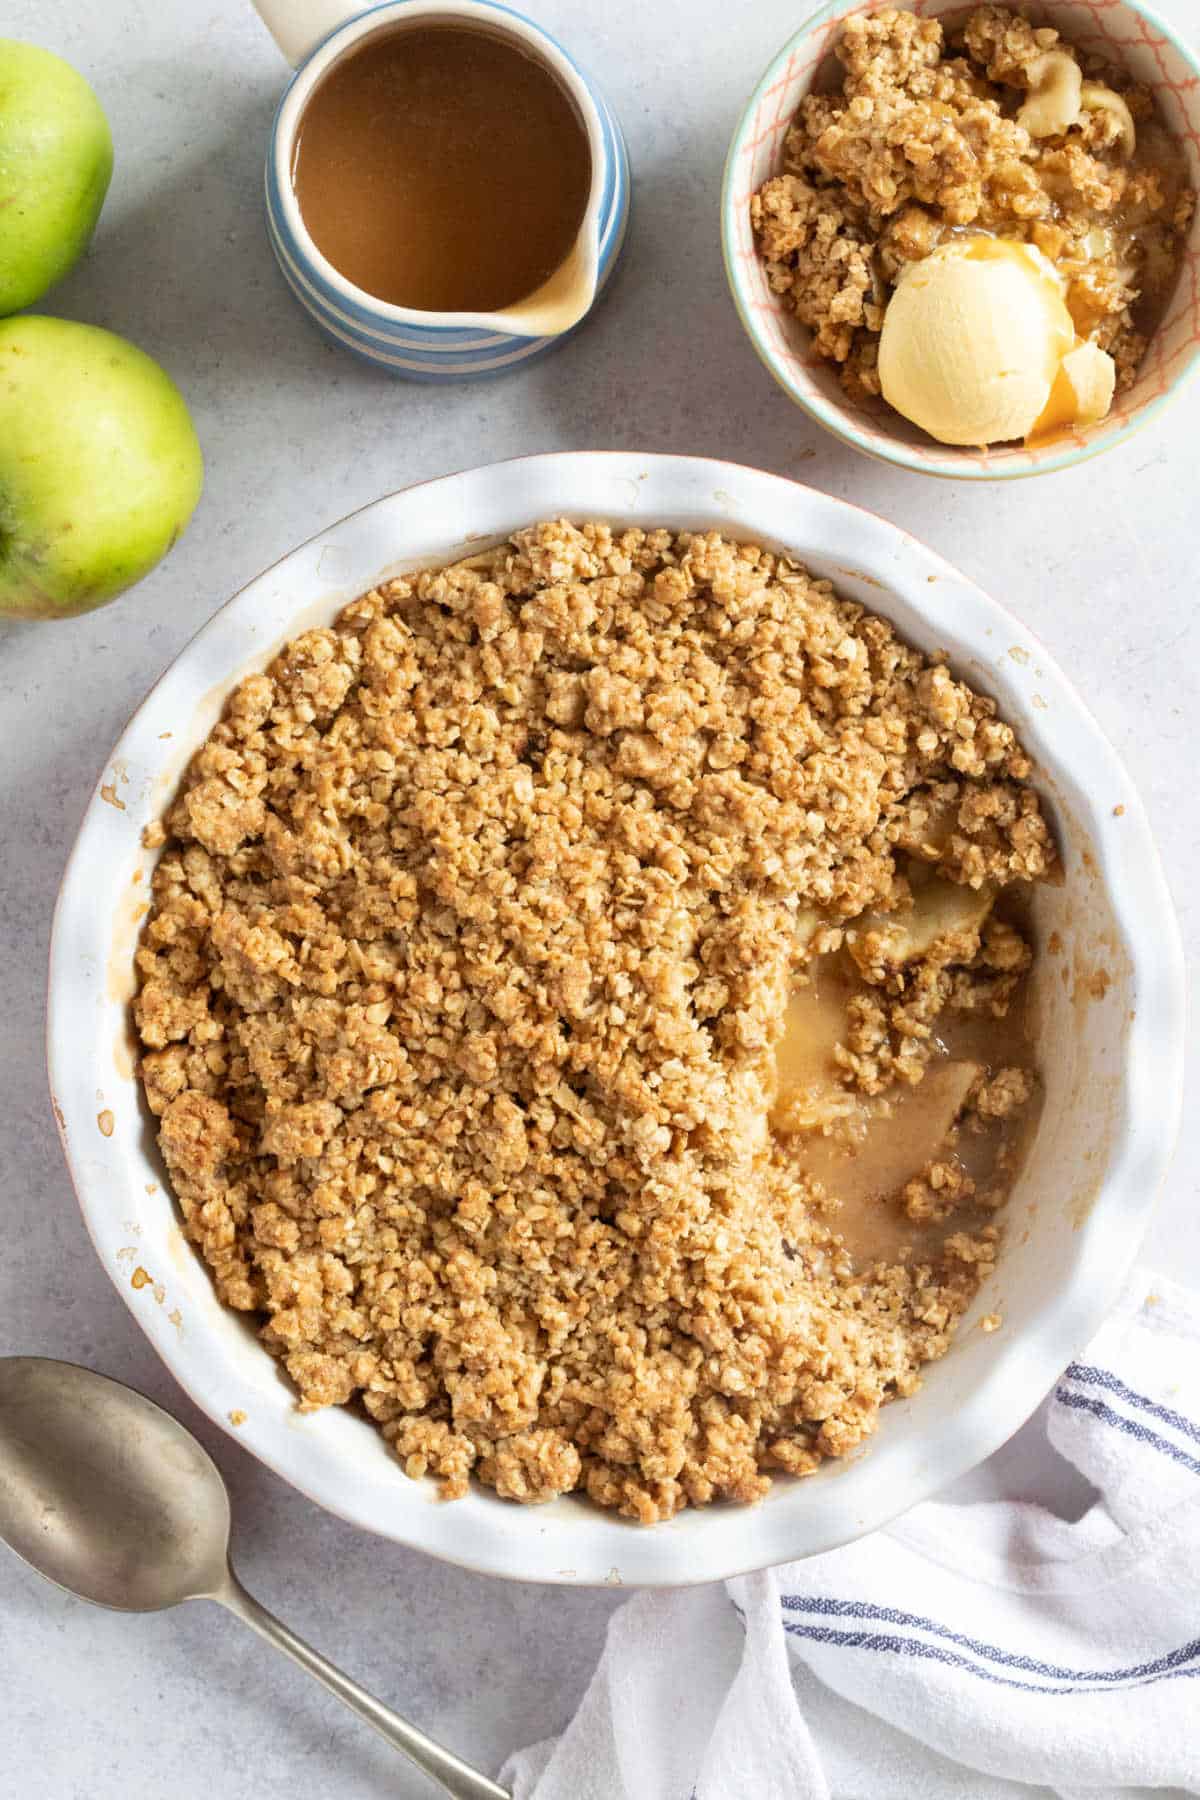 Warm toffee apple crumble served with vanilla ice-cream and extra toffee sauce in an autumn setting.